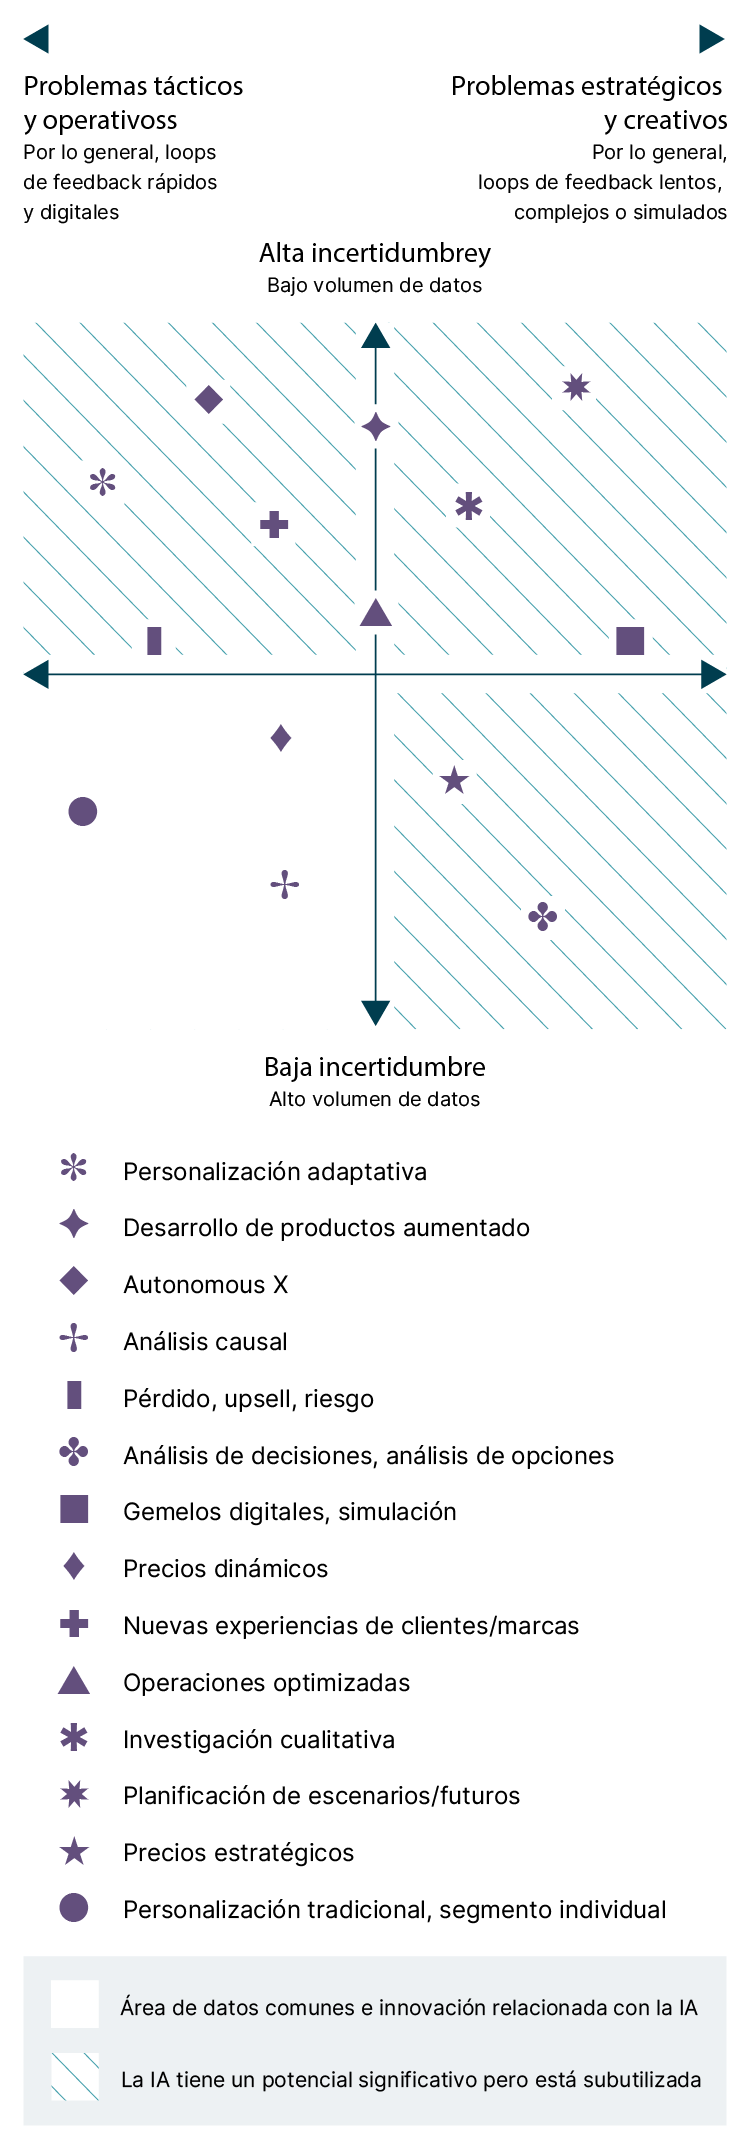 AI solutions mapped across two axes - first, from tactical to strategic problems and second, from low- to high-uncertainty